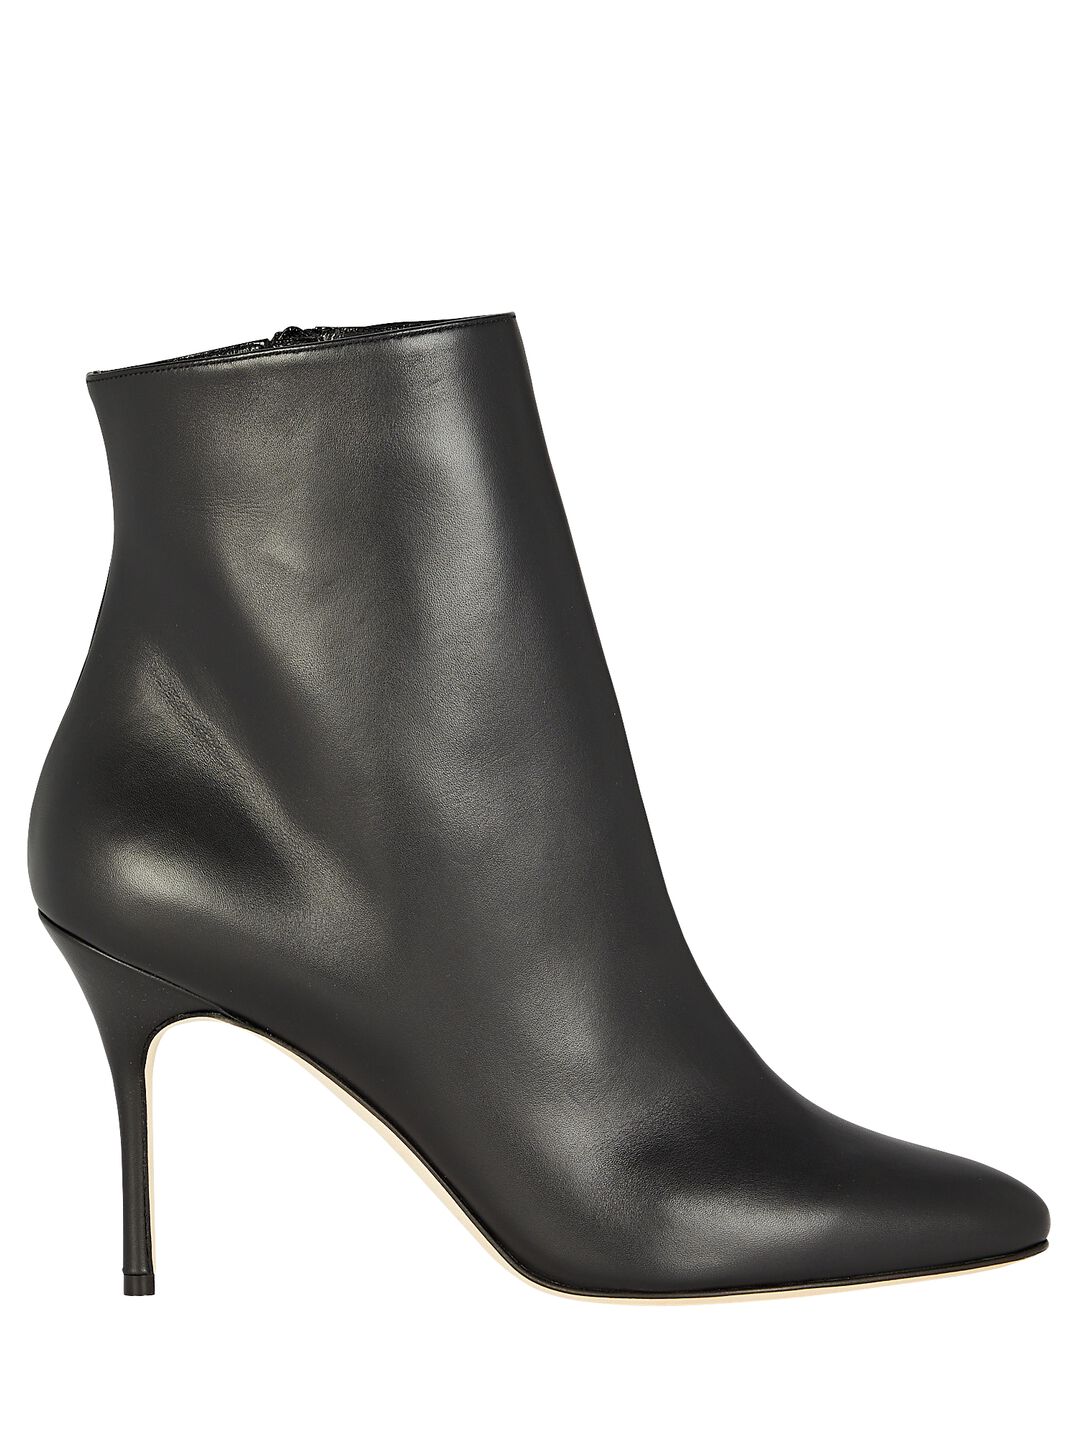 Inspo Leather Ankle Boots